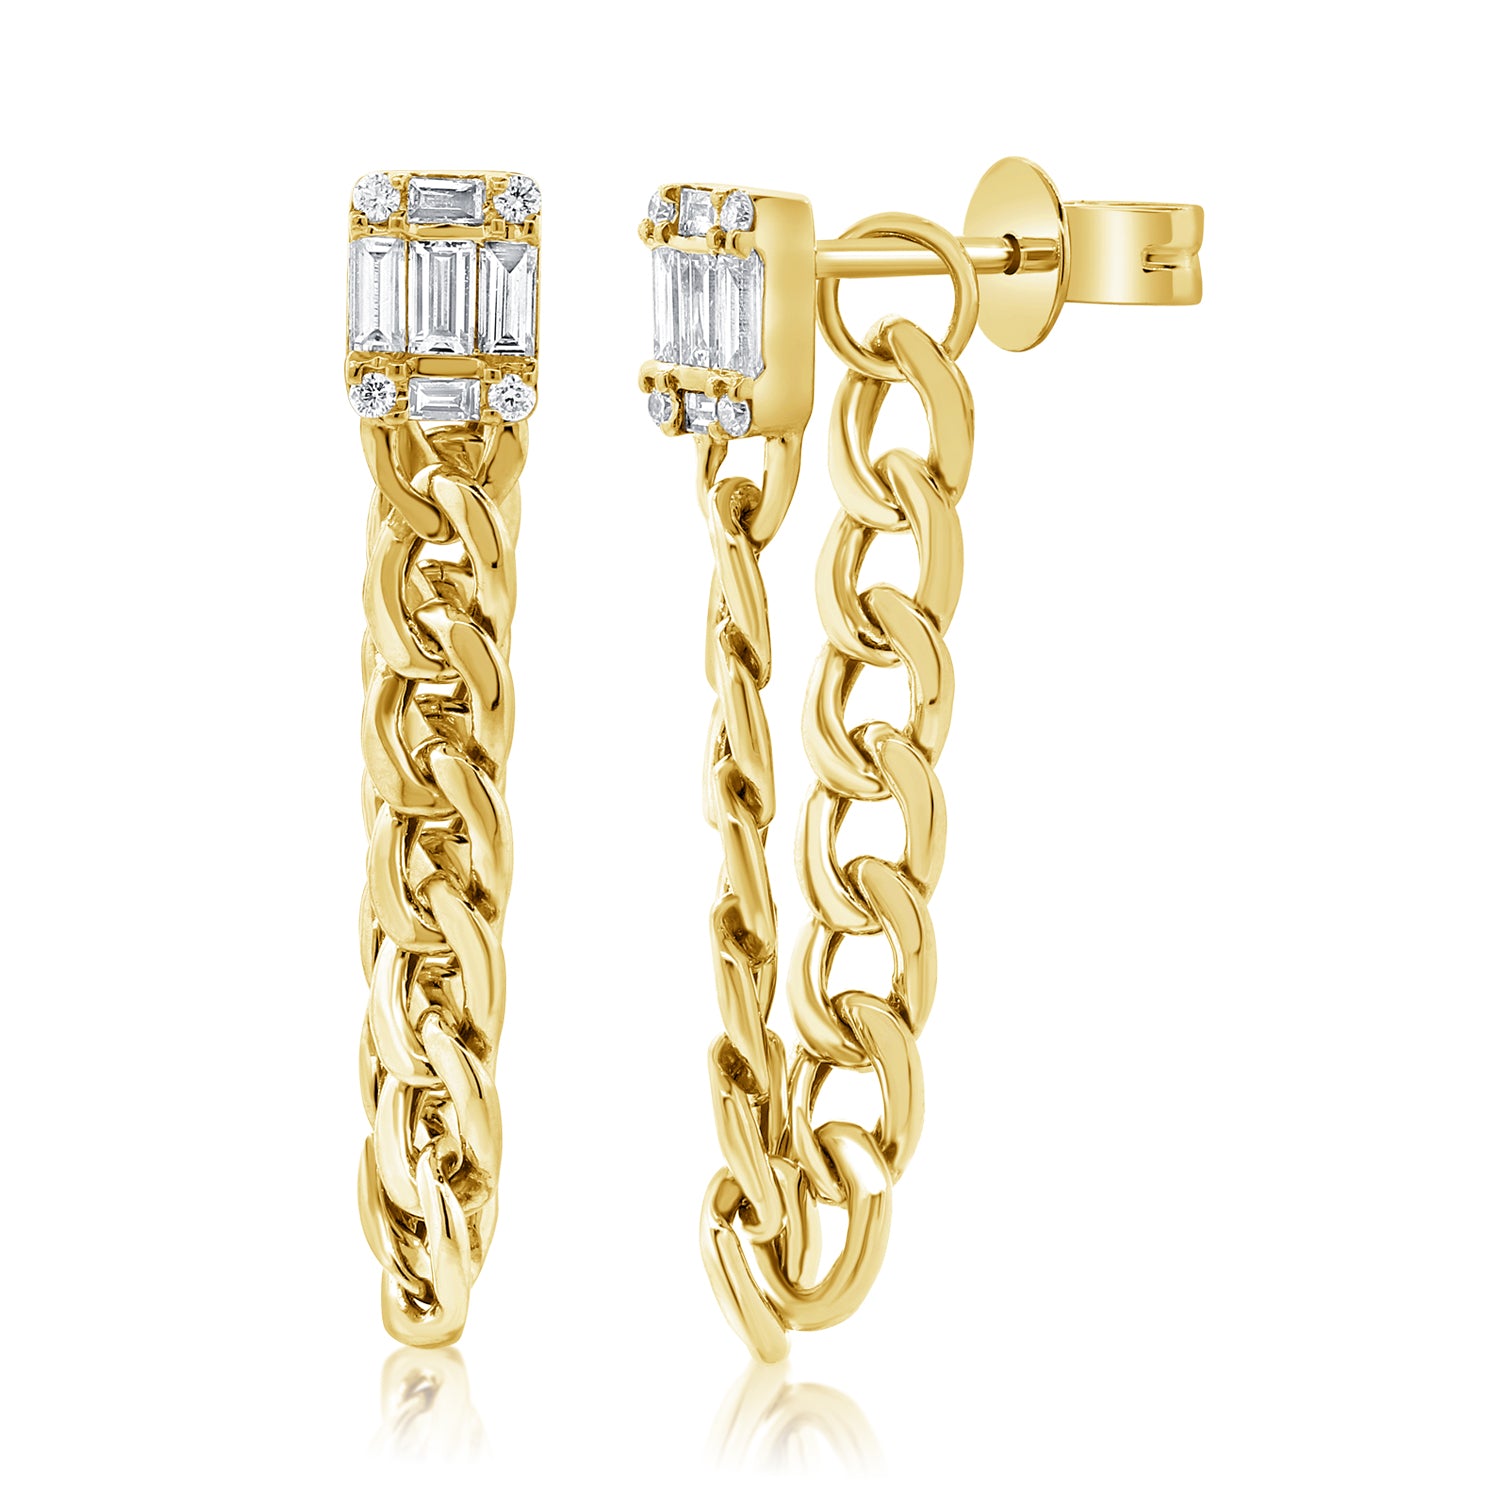 Baguette And Cuban Link Chain Earrings